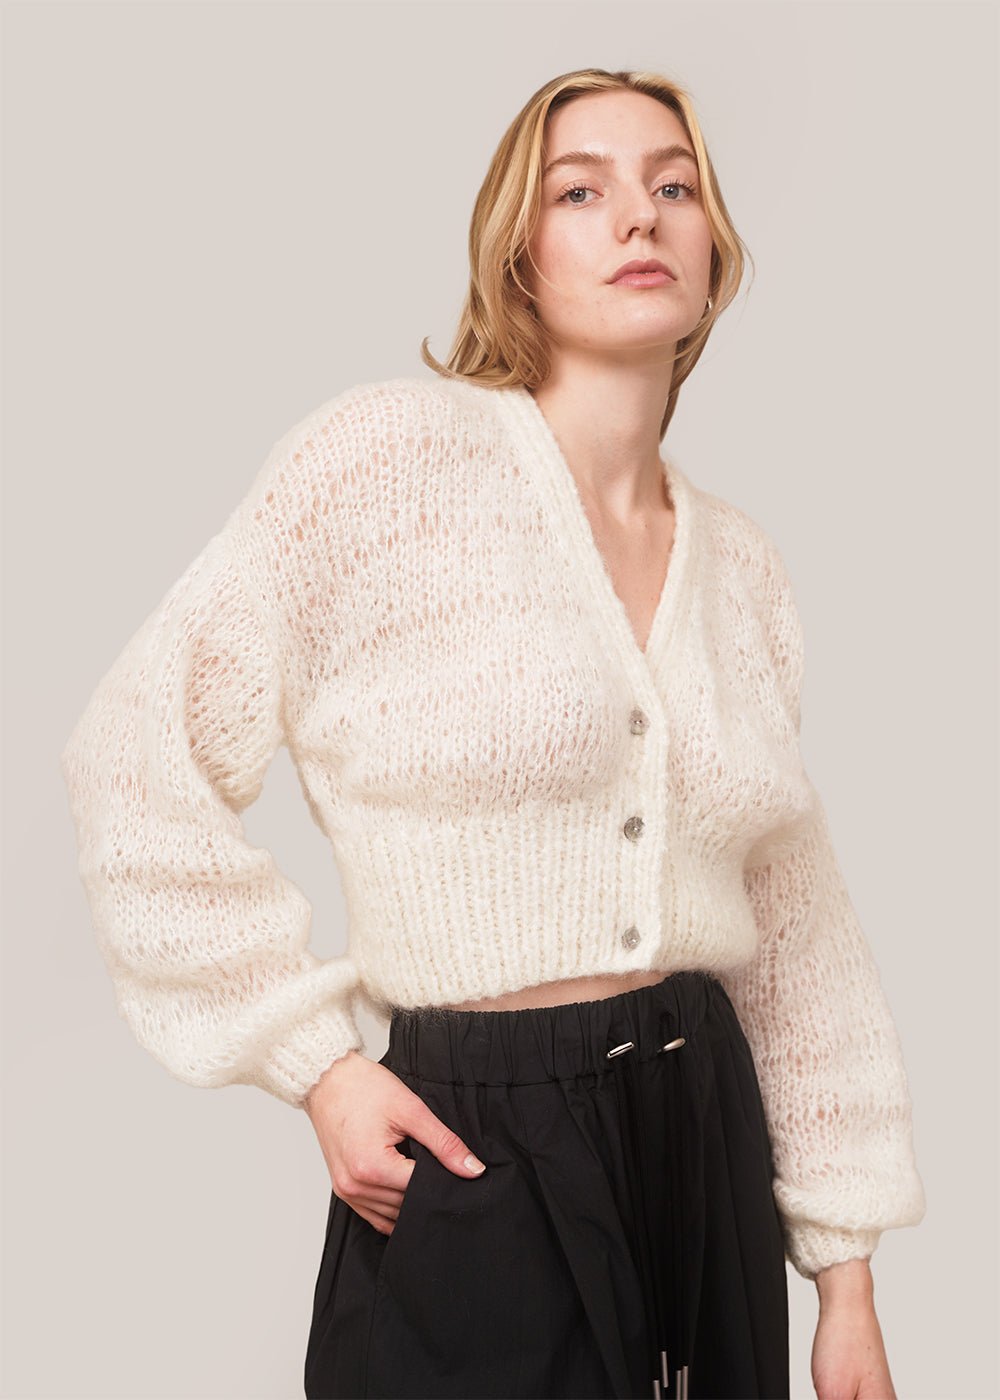 Women's Tops  Cropped, Knit, Long-Sleeve – Perfect Stranger